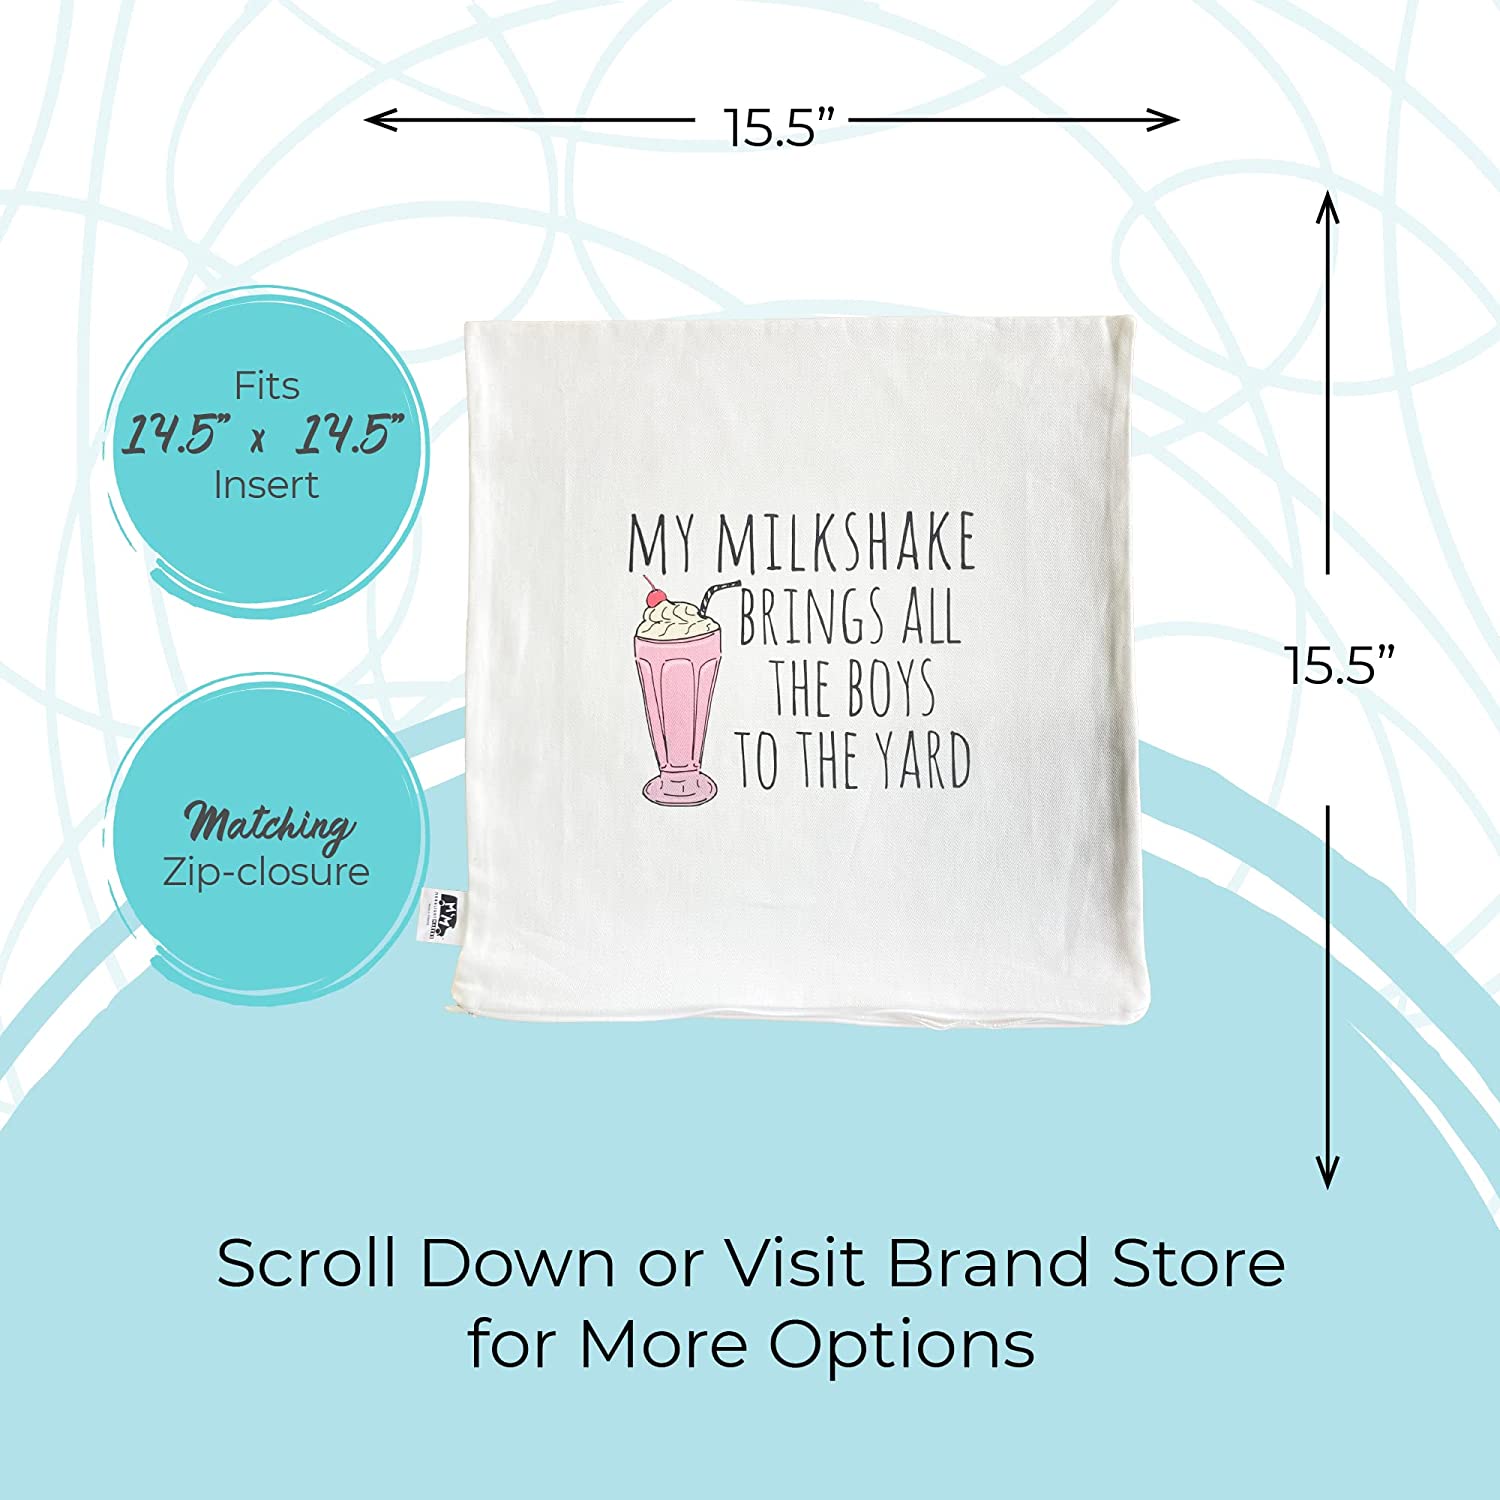 All You Knead Is Love - Decorative Throw Pillow - MoonlightMakers